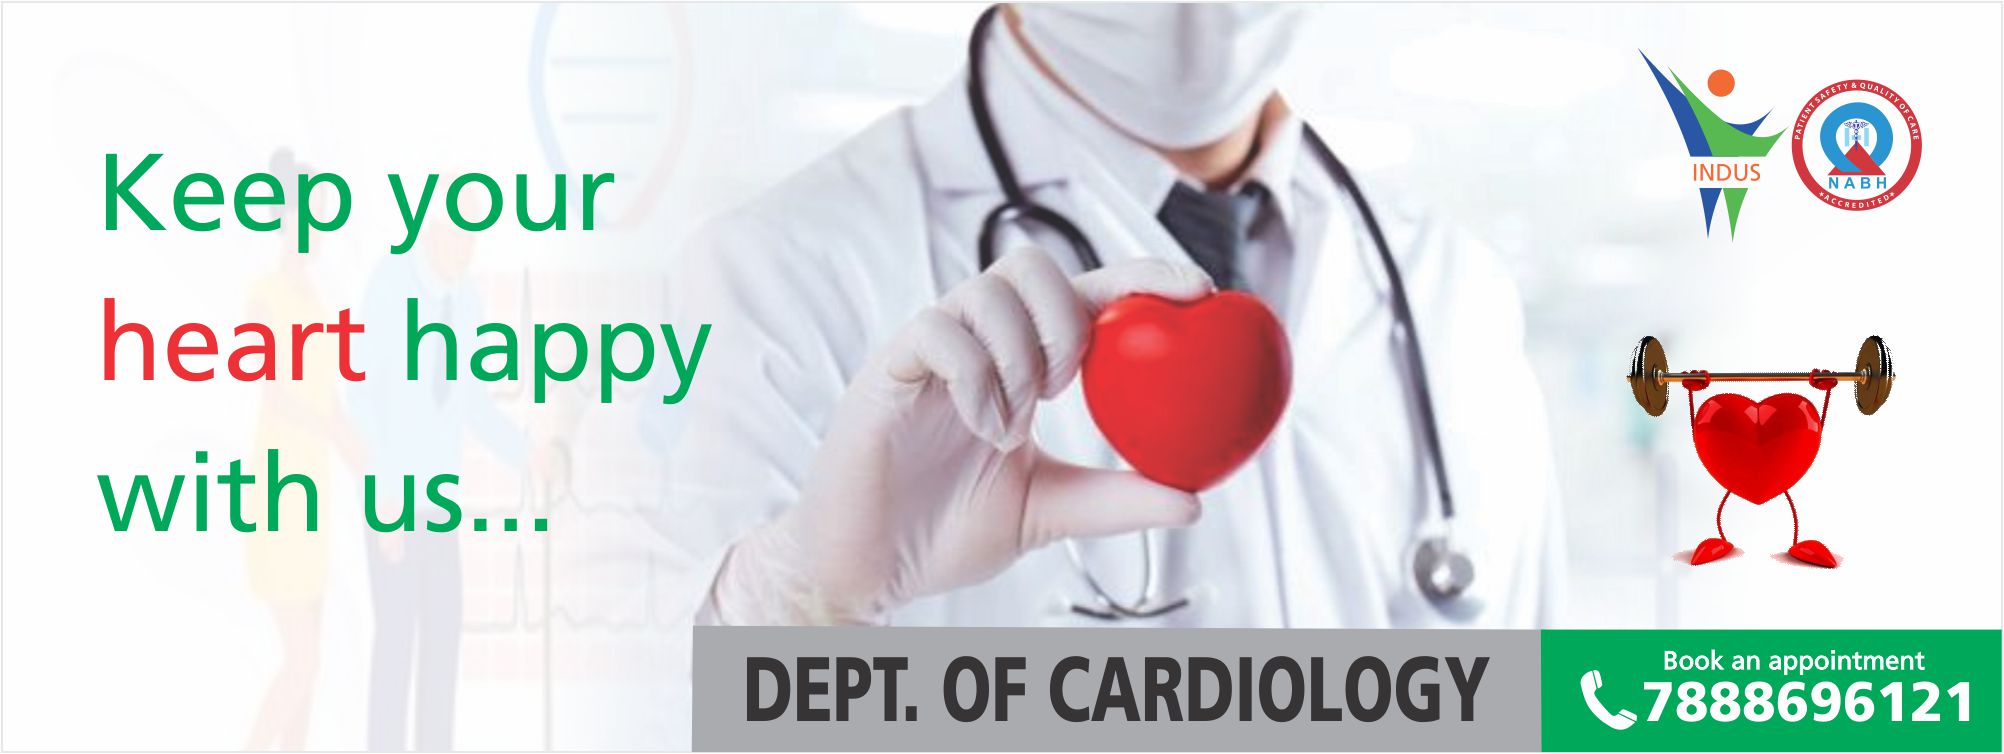 Indus Hospital Cardiology department